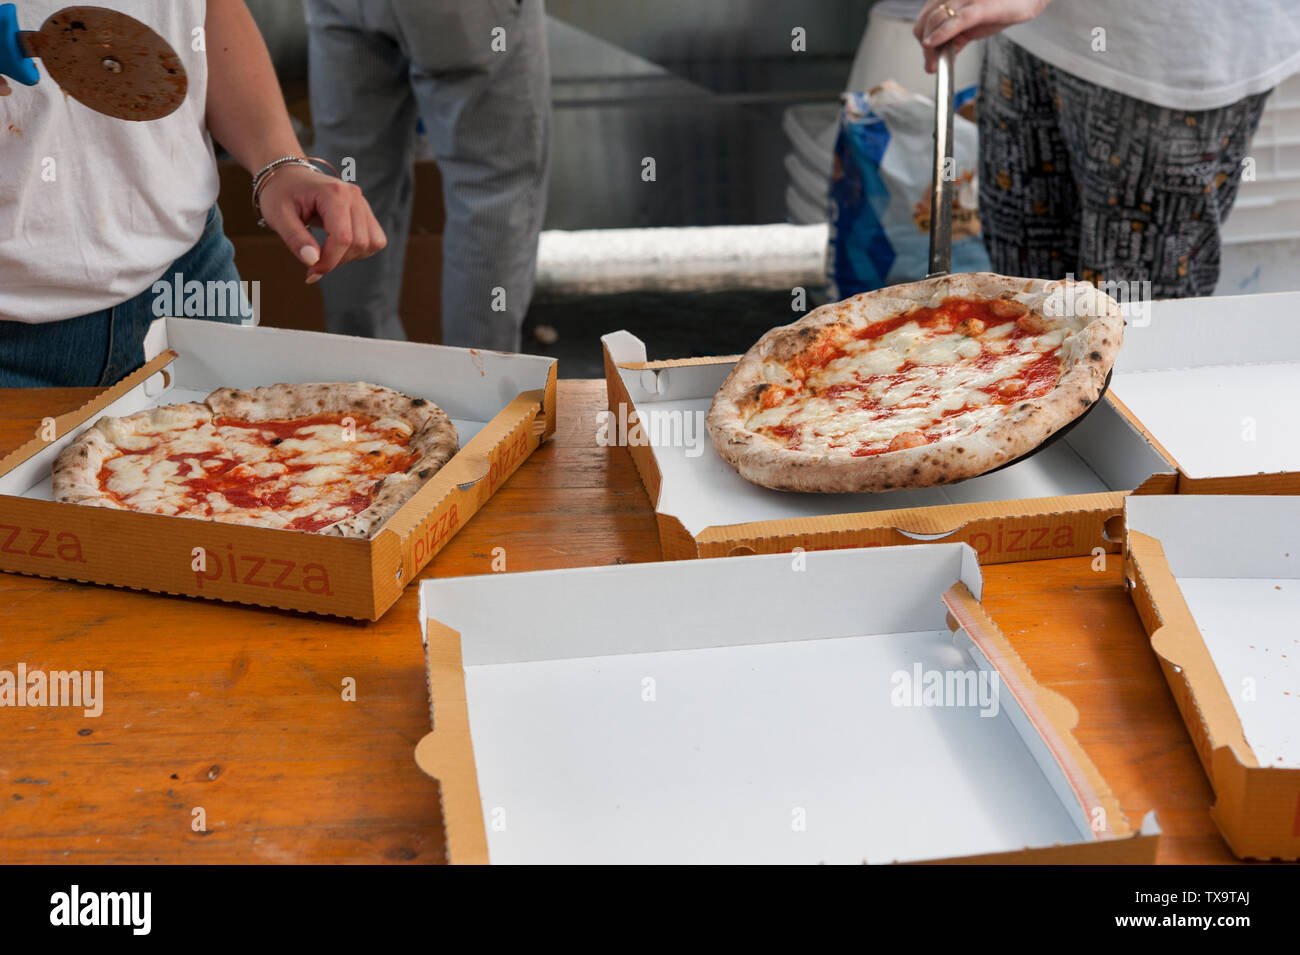 Hot pizza Margherita cut into slices, ready to take-away in cardboard boxes. Stock Photo